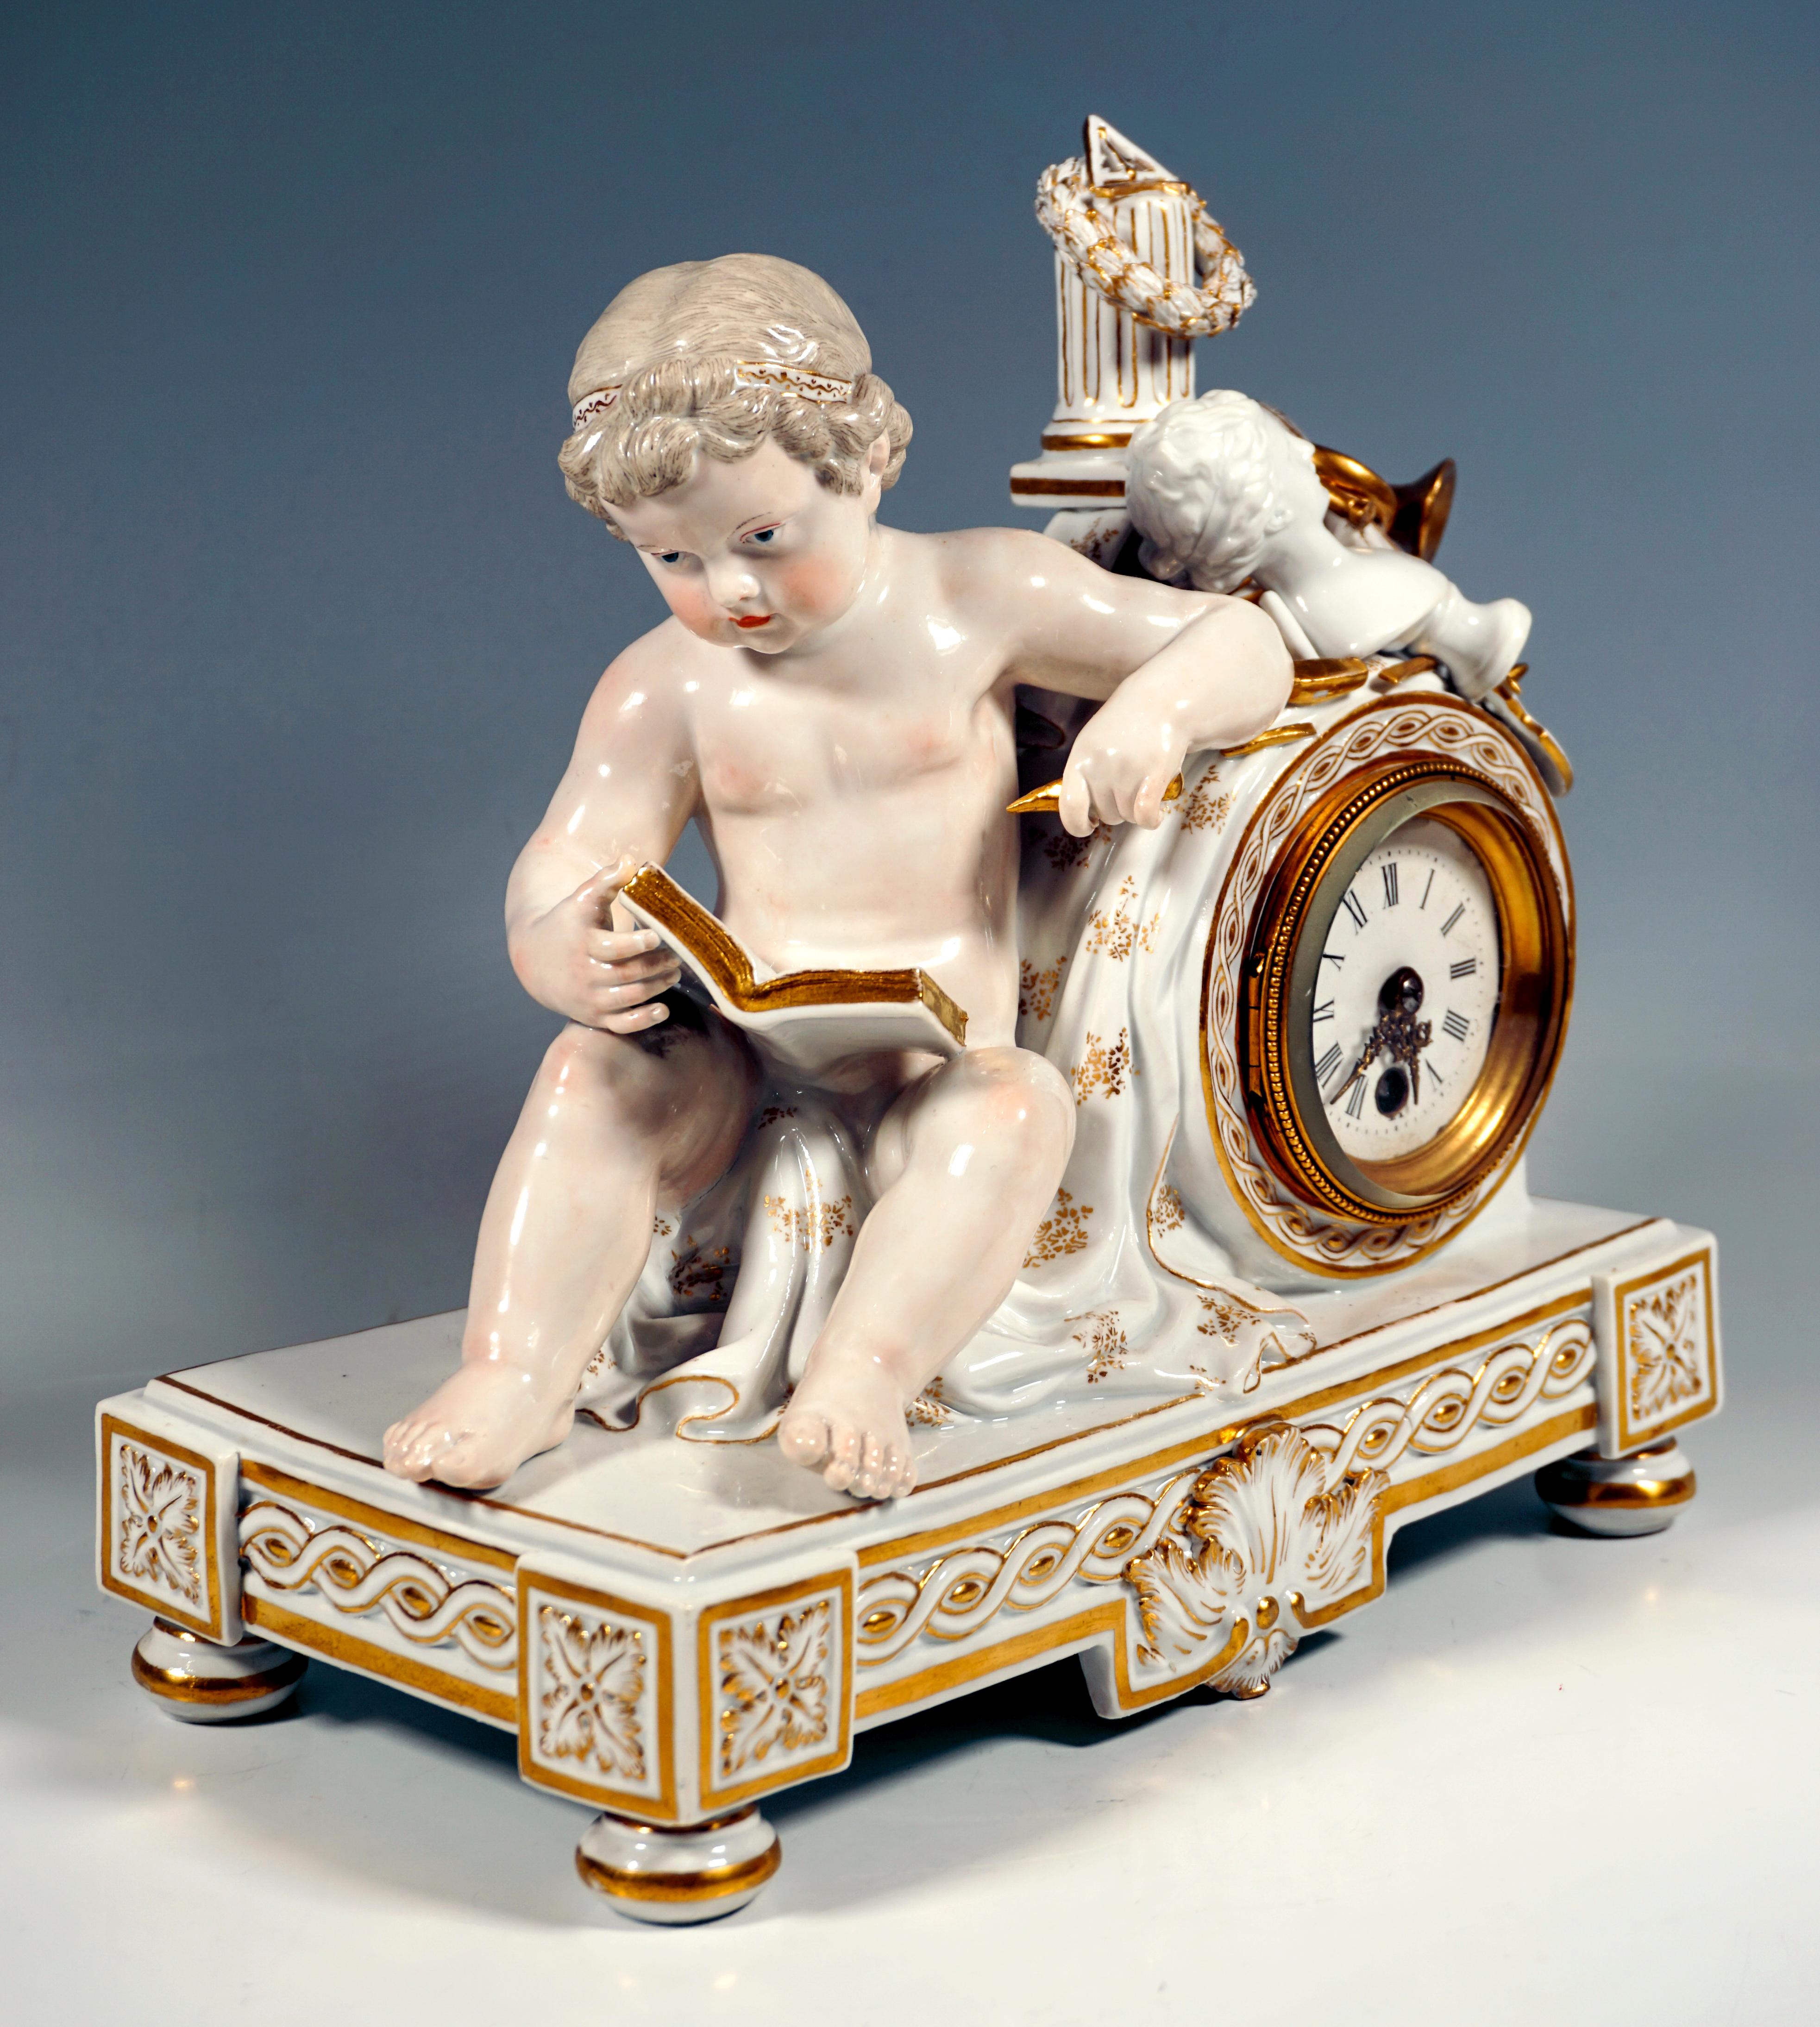 19th century sculptural porcelain clock case:
Rectangular base plate standing on four loaf feet at the corners, as well as on the long sides below central rocaille panels reaching to the floor, laterally intertwined wavy band frieze, as well as